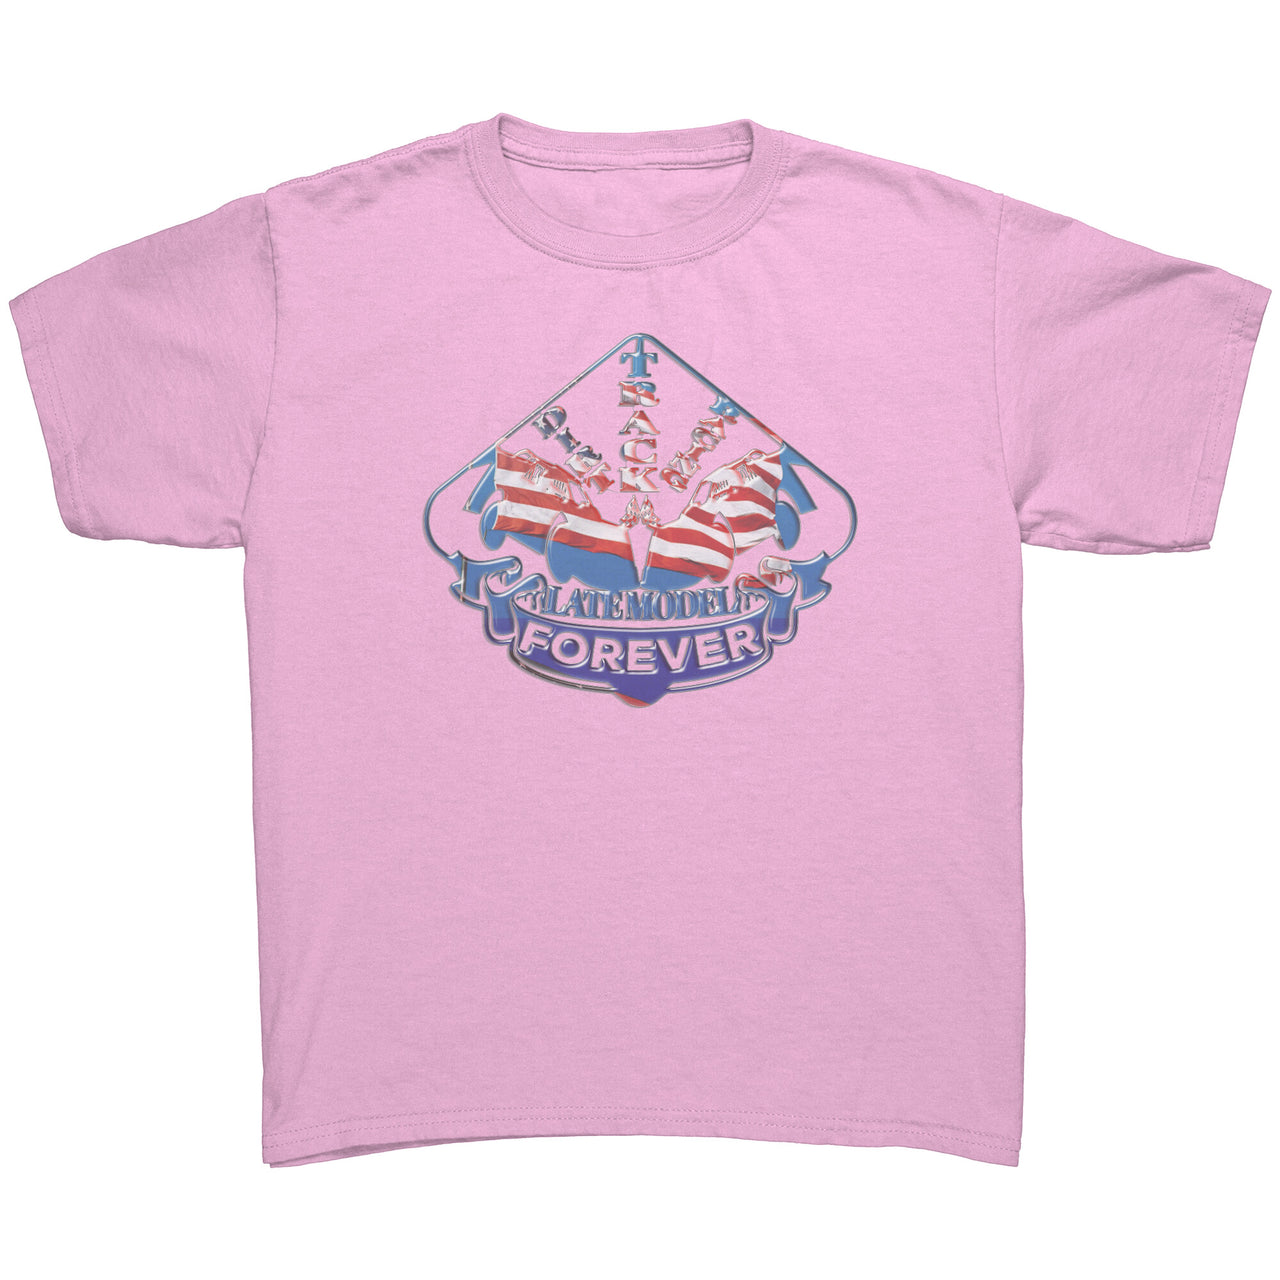 USA Dirt Racing Late Model Forever Youth T-shirts/Hoodies